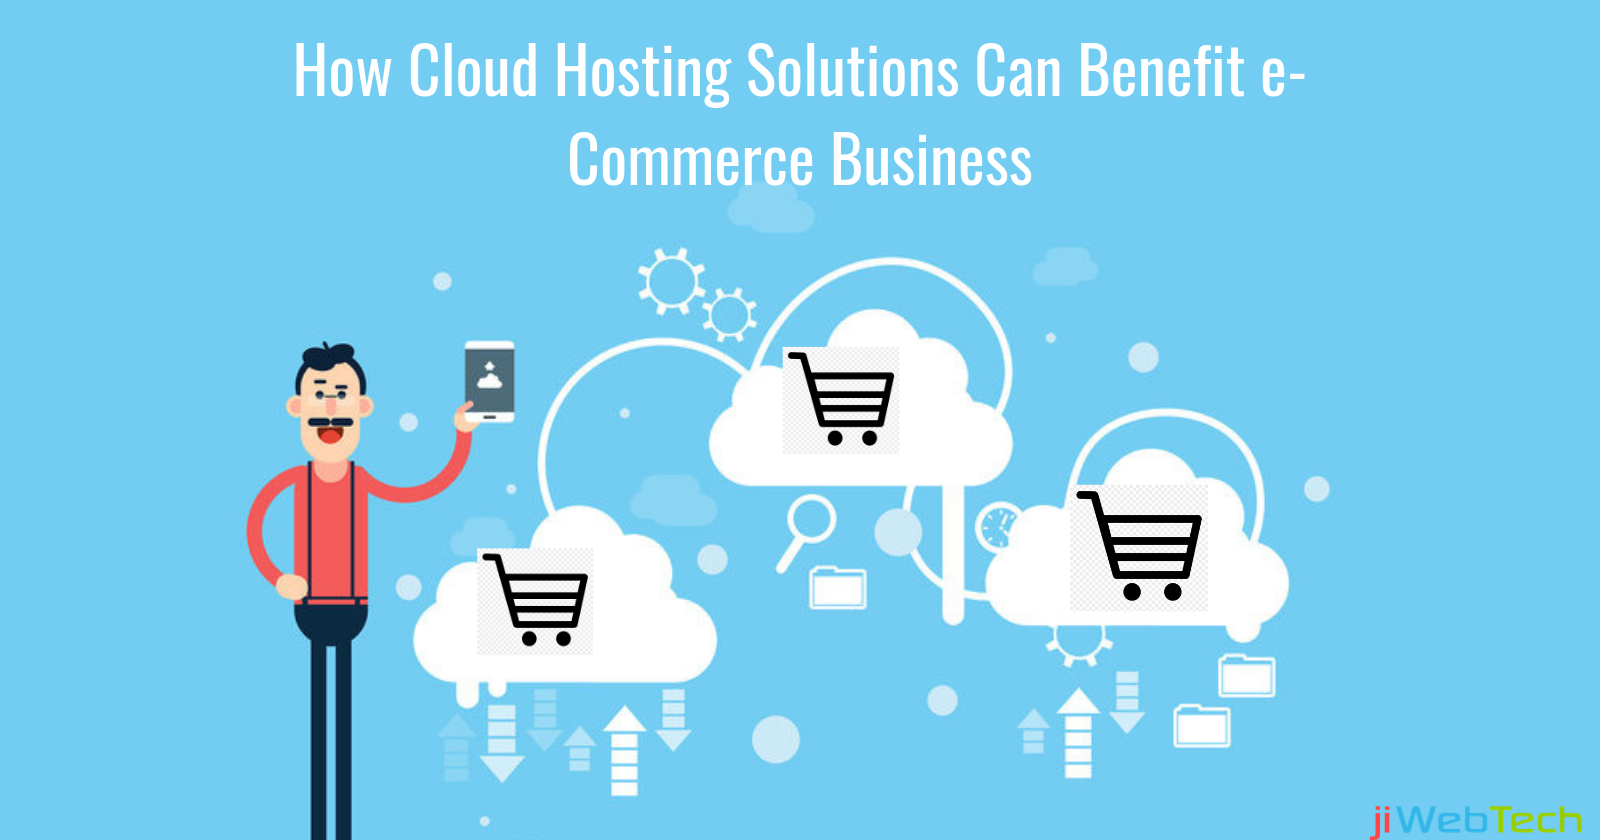 How Cloud Hosting Solutions Can Benefit e-Commerce Business